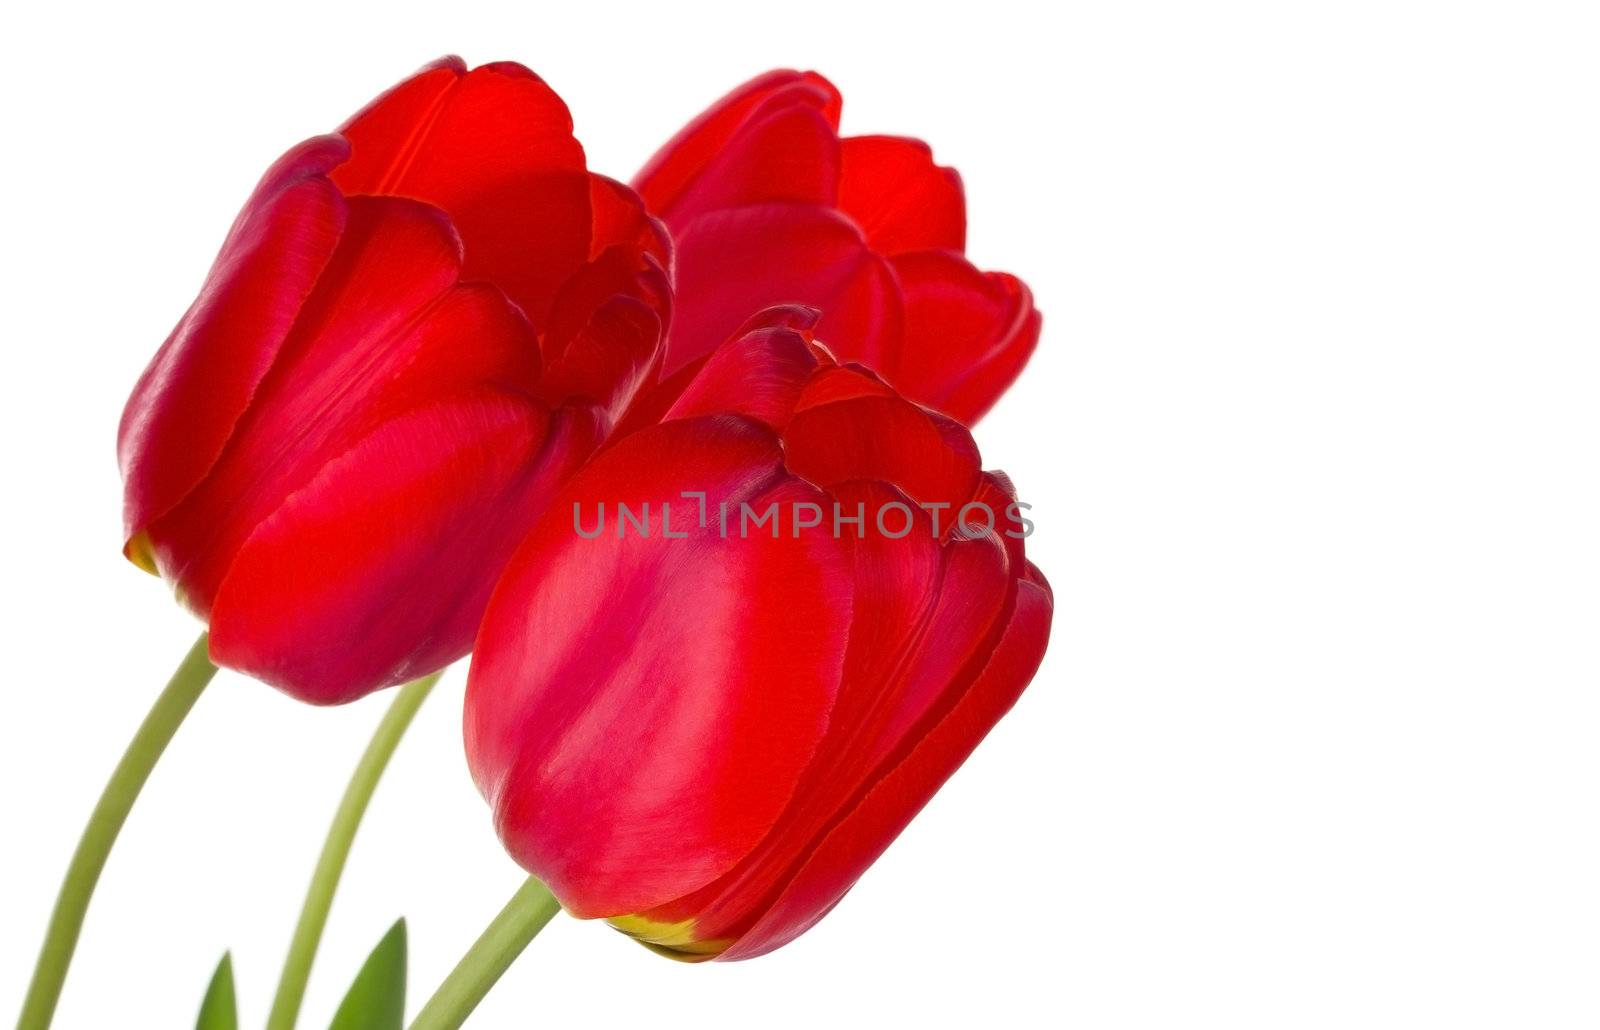 close-up three red tulips, selected focus, isolated on white